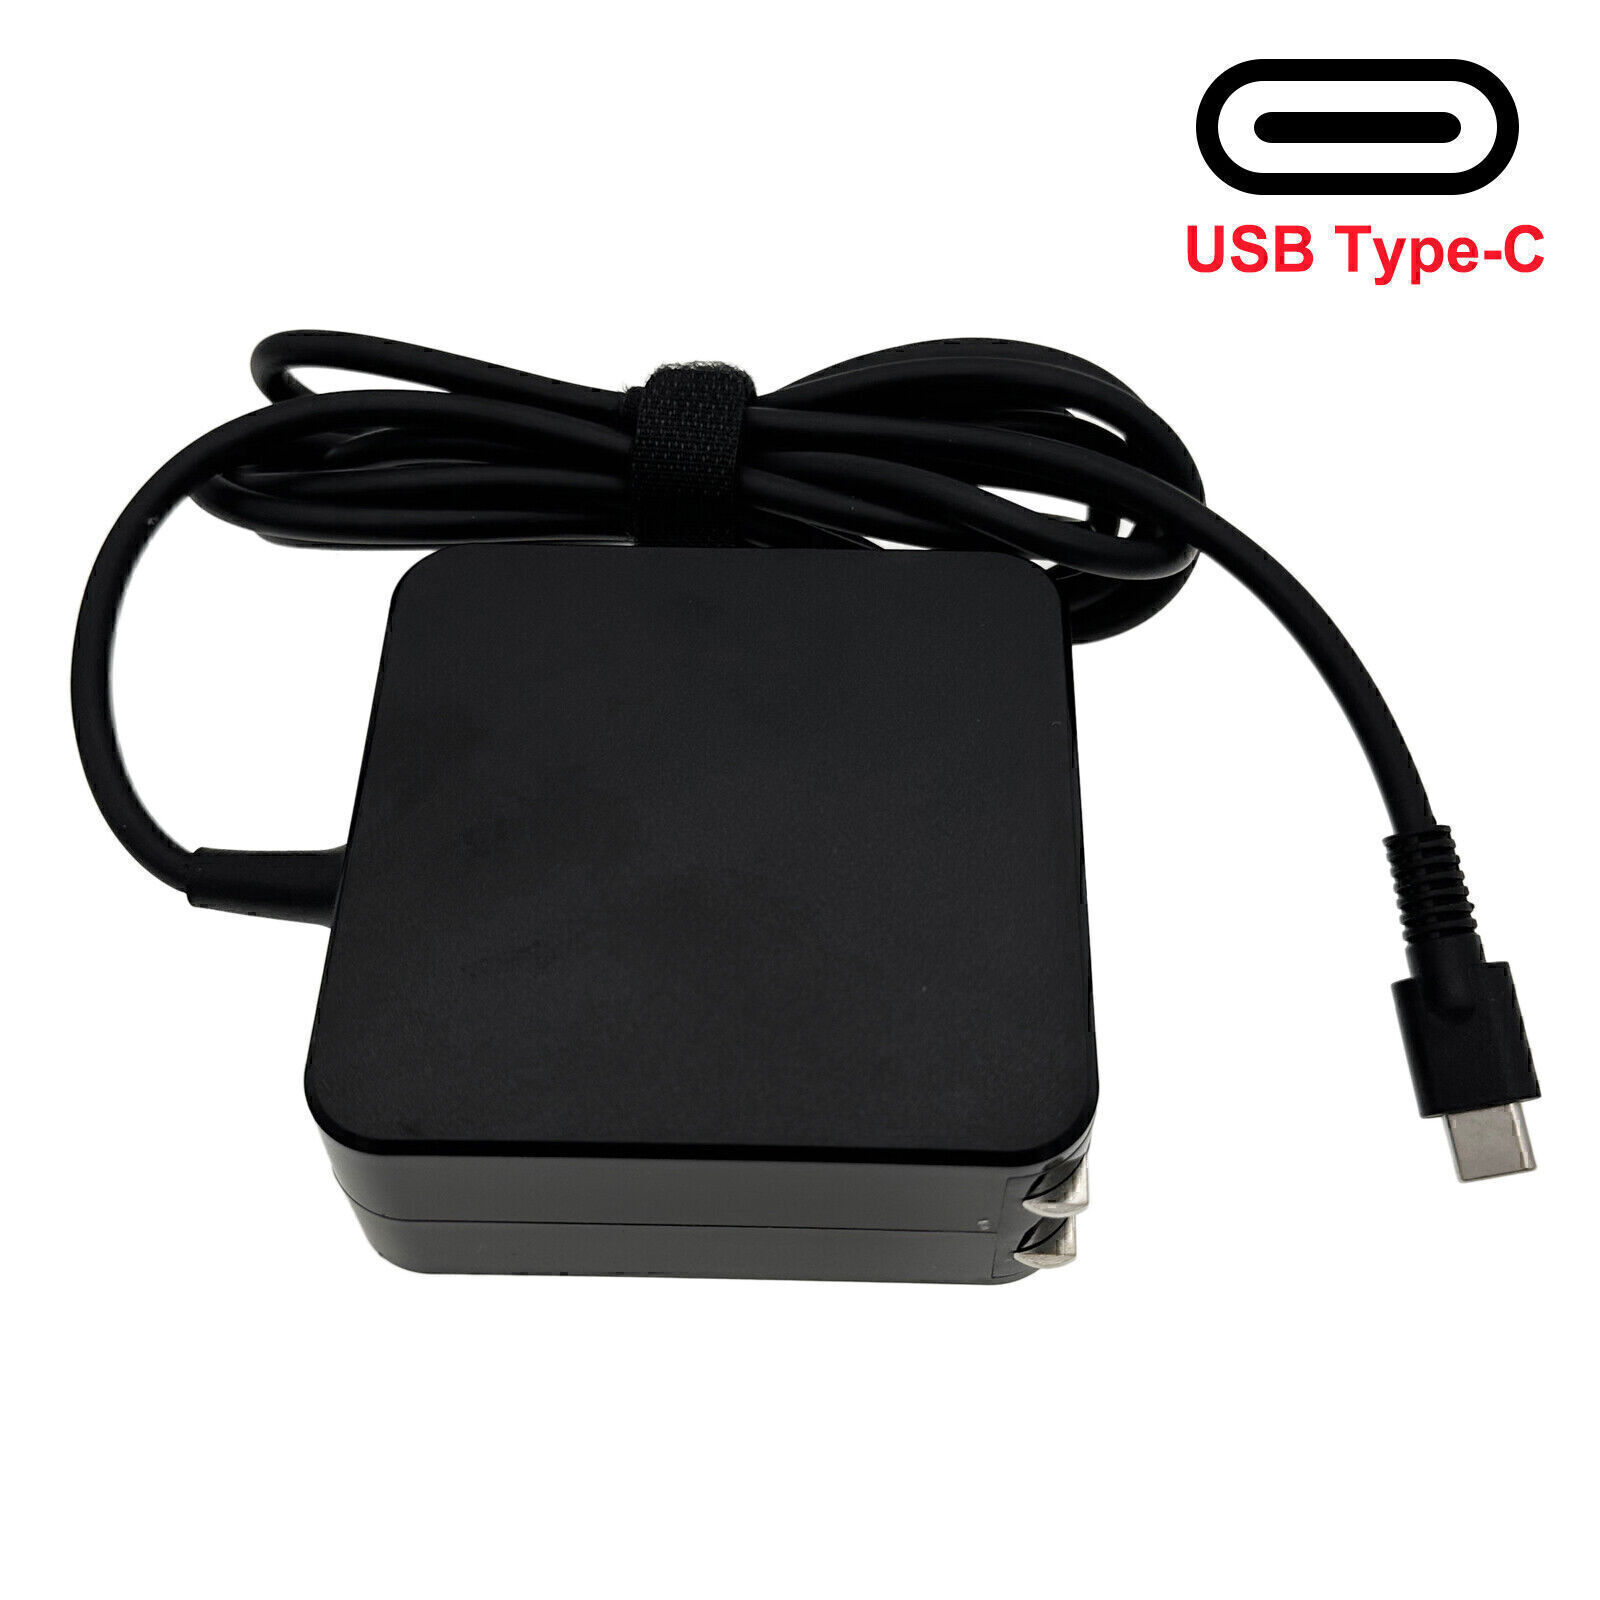 Adapter Charger For Lenovo ThinkPad T480 T480s T490 T490s T495s T580 T580s T590